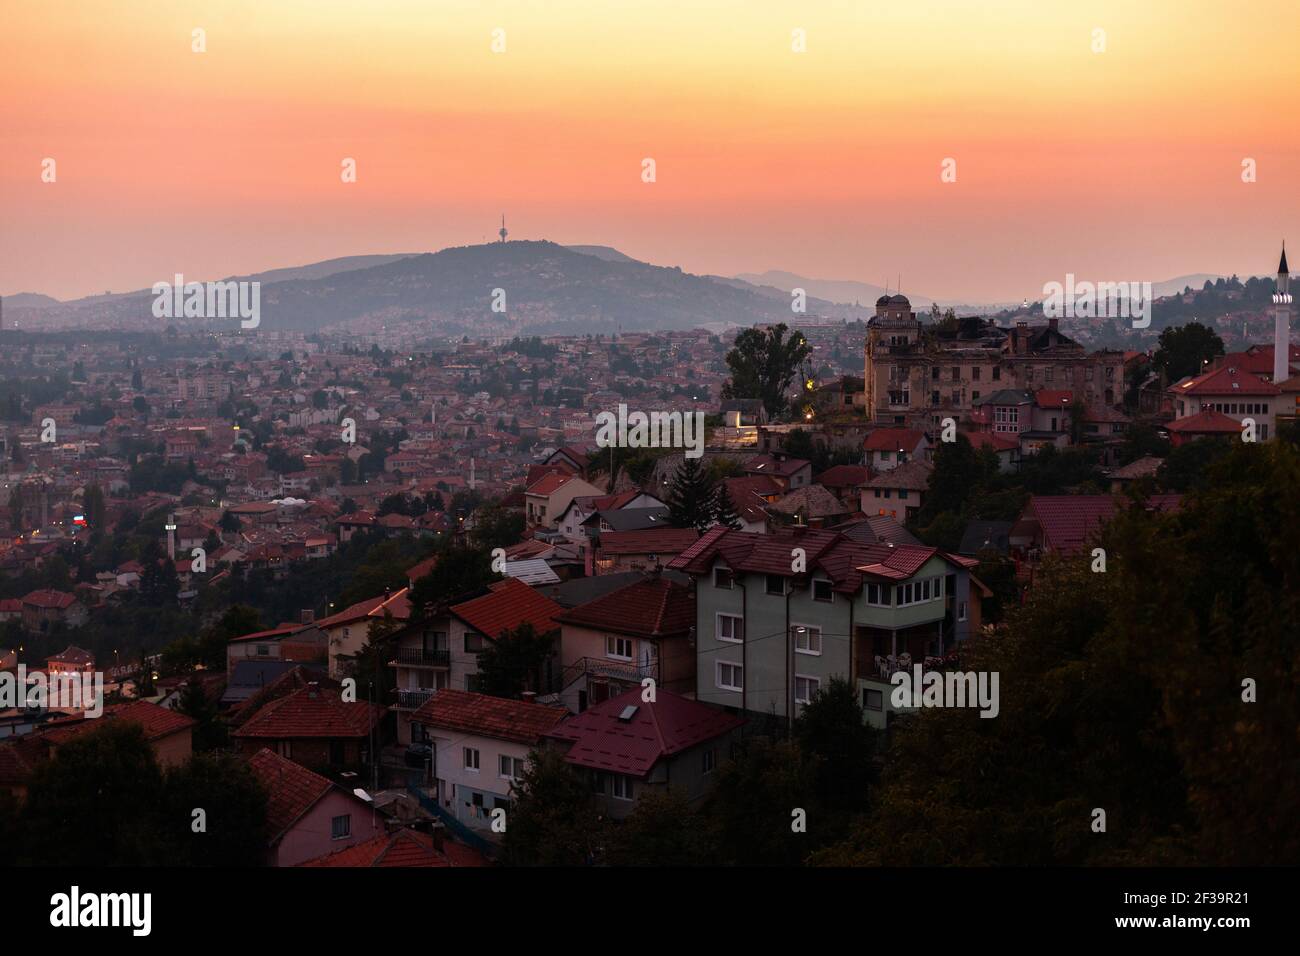 View of Sarajevo cityscape with Hum Tower in background during sunset Stock Photo